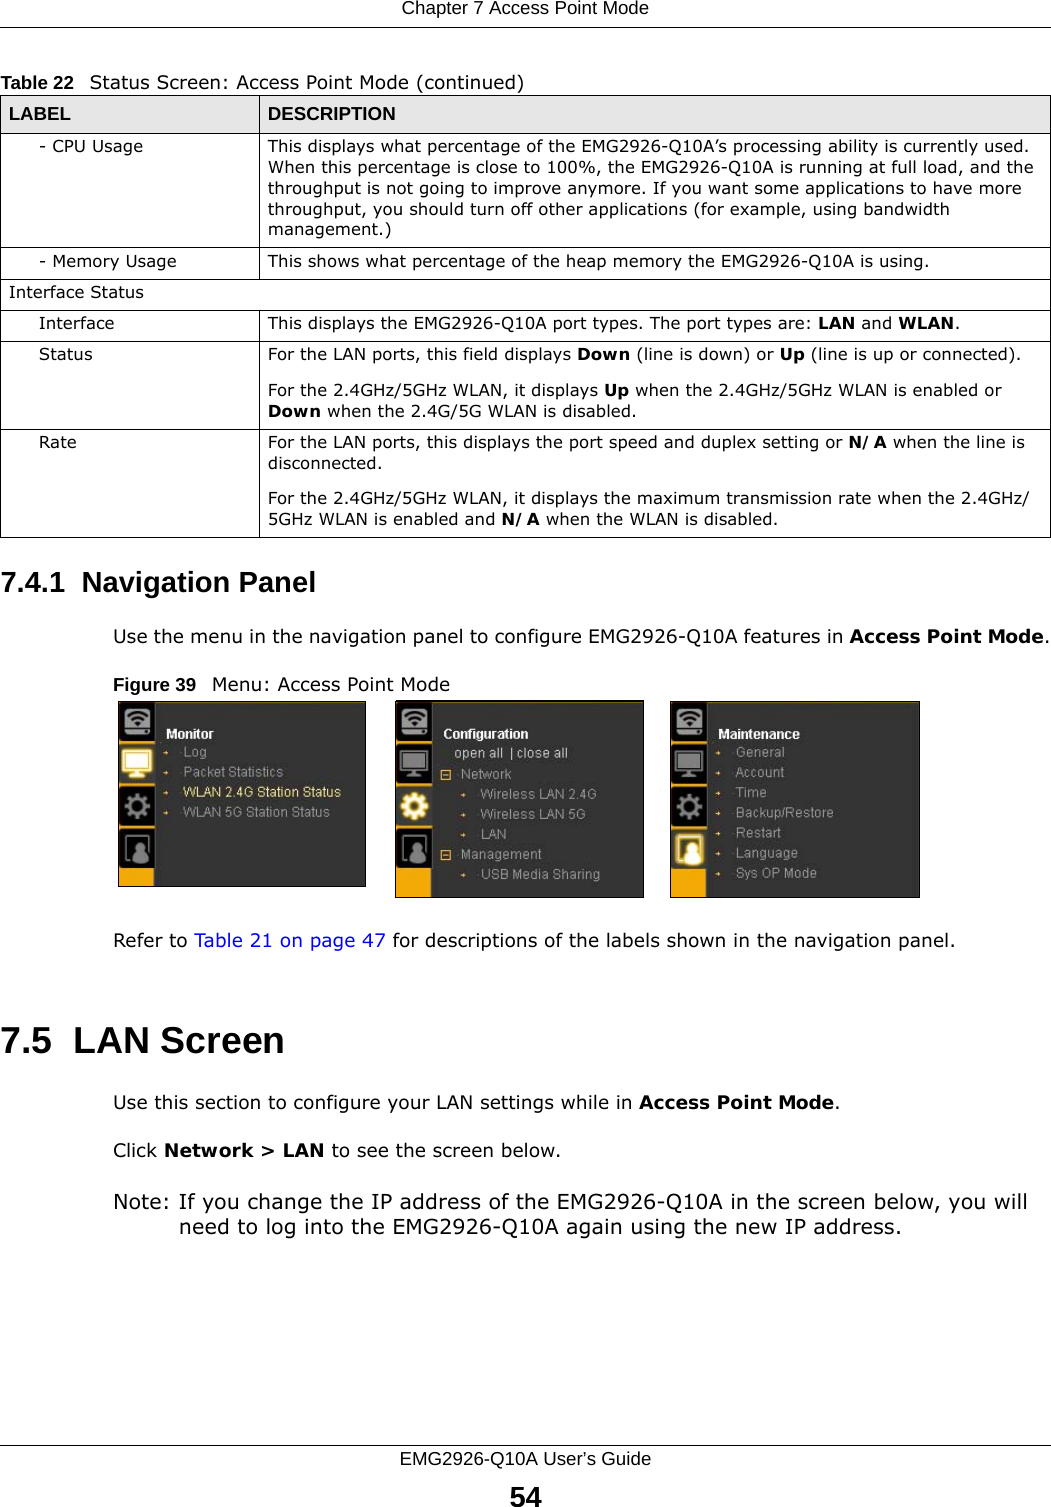 Chapter 7 Access Point ModeEMG2926-Q10A User’s Guide547.4.1  Navigation PanelUse the menu in the navigation panel to configure EMG2926-Q10A features in Access Point Mode.Figure 39   Menu: Access Point Mode Refer to Table 21 on page 47 for descriptions of the labels shown in the navigation panel.7.5  LAN ScreenUse this section to configure your LAN settings while in Access Point Mode. Click Network &gt; LAN to see the screen below.Note: If you change the IP address of the EMG2926-Q10A in the screen below, you will need to log into the EMG2926-Q10A again using the new IP address.- CPU Usage This displays what percentage of the EMG2926-Q10A’s processing ability is currently used. When this percentage is close to 100%, the EMG2926-Q10A is running at full load, and the throughput is not going to improve anymore. If you want some applications to have more throughput, you should turn off other applications (for example, using bandwidth management.)- Memory Usage This shows what percentage of the heap memory the EMG2926-Q10A is using. Interface StatusInterface This displays the EMG2926-Q10A port types. The port types are: LAN and WLAN.Status For the LAN ports, this field displays Down (line is down) or Up (line is up or connected).For the 2.4GHz/5GHz WLAN, it displays Up when the 2.4GHz/5GHz WLAN is enabled or Down when the 2.4G/5G WLAN is disabled.Rate For the LAN ports, this displays the port speed and duplex setting or N/A when the line is disconnected.For the 2.4GHz/5GHz WLAN, it displays the maximum transmission rate when the 2.4GHz/5GHz WLAN is enabled and N/A when the WLAN is disabled.Table 22   Status Screen: Access Point Mode (continued) LABEL DESCRIPTION